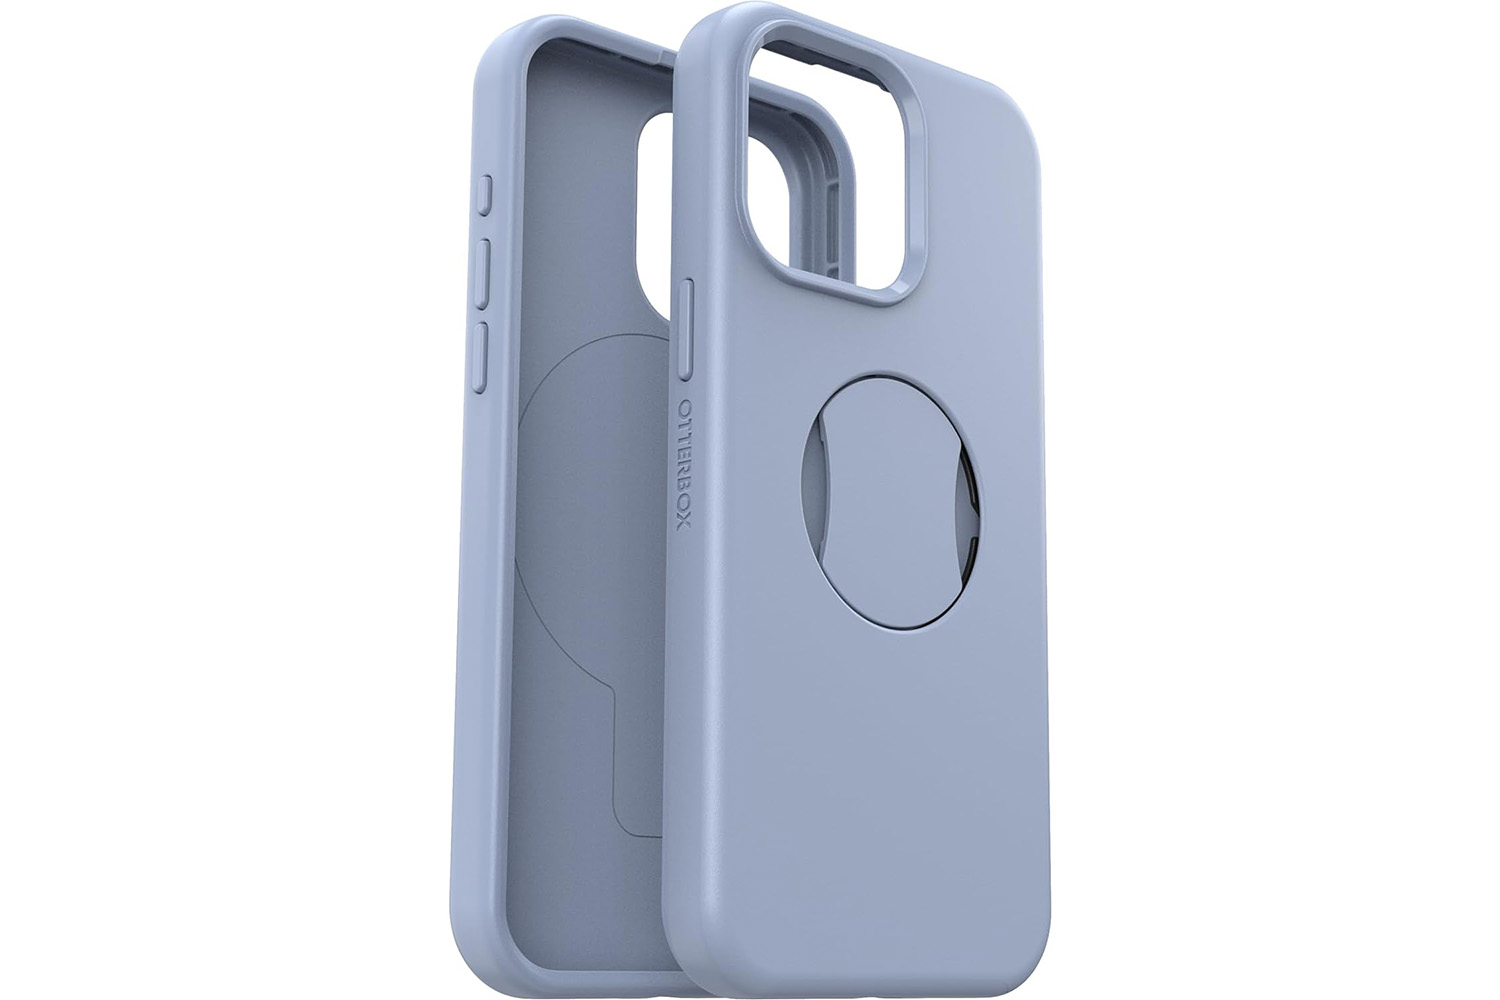  OtterBox - Ultra-Slim iPhone 13 Mini Case (ONLY) - Made for  Apple MagSafe, Artistic Protective Phone Case with Soft-Touch Material for  Comfort (Mercury Graphic) : Cell Phones & Accessories